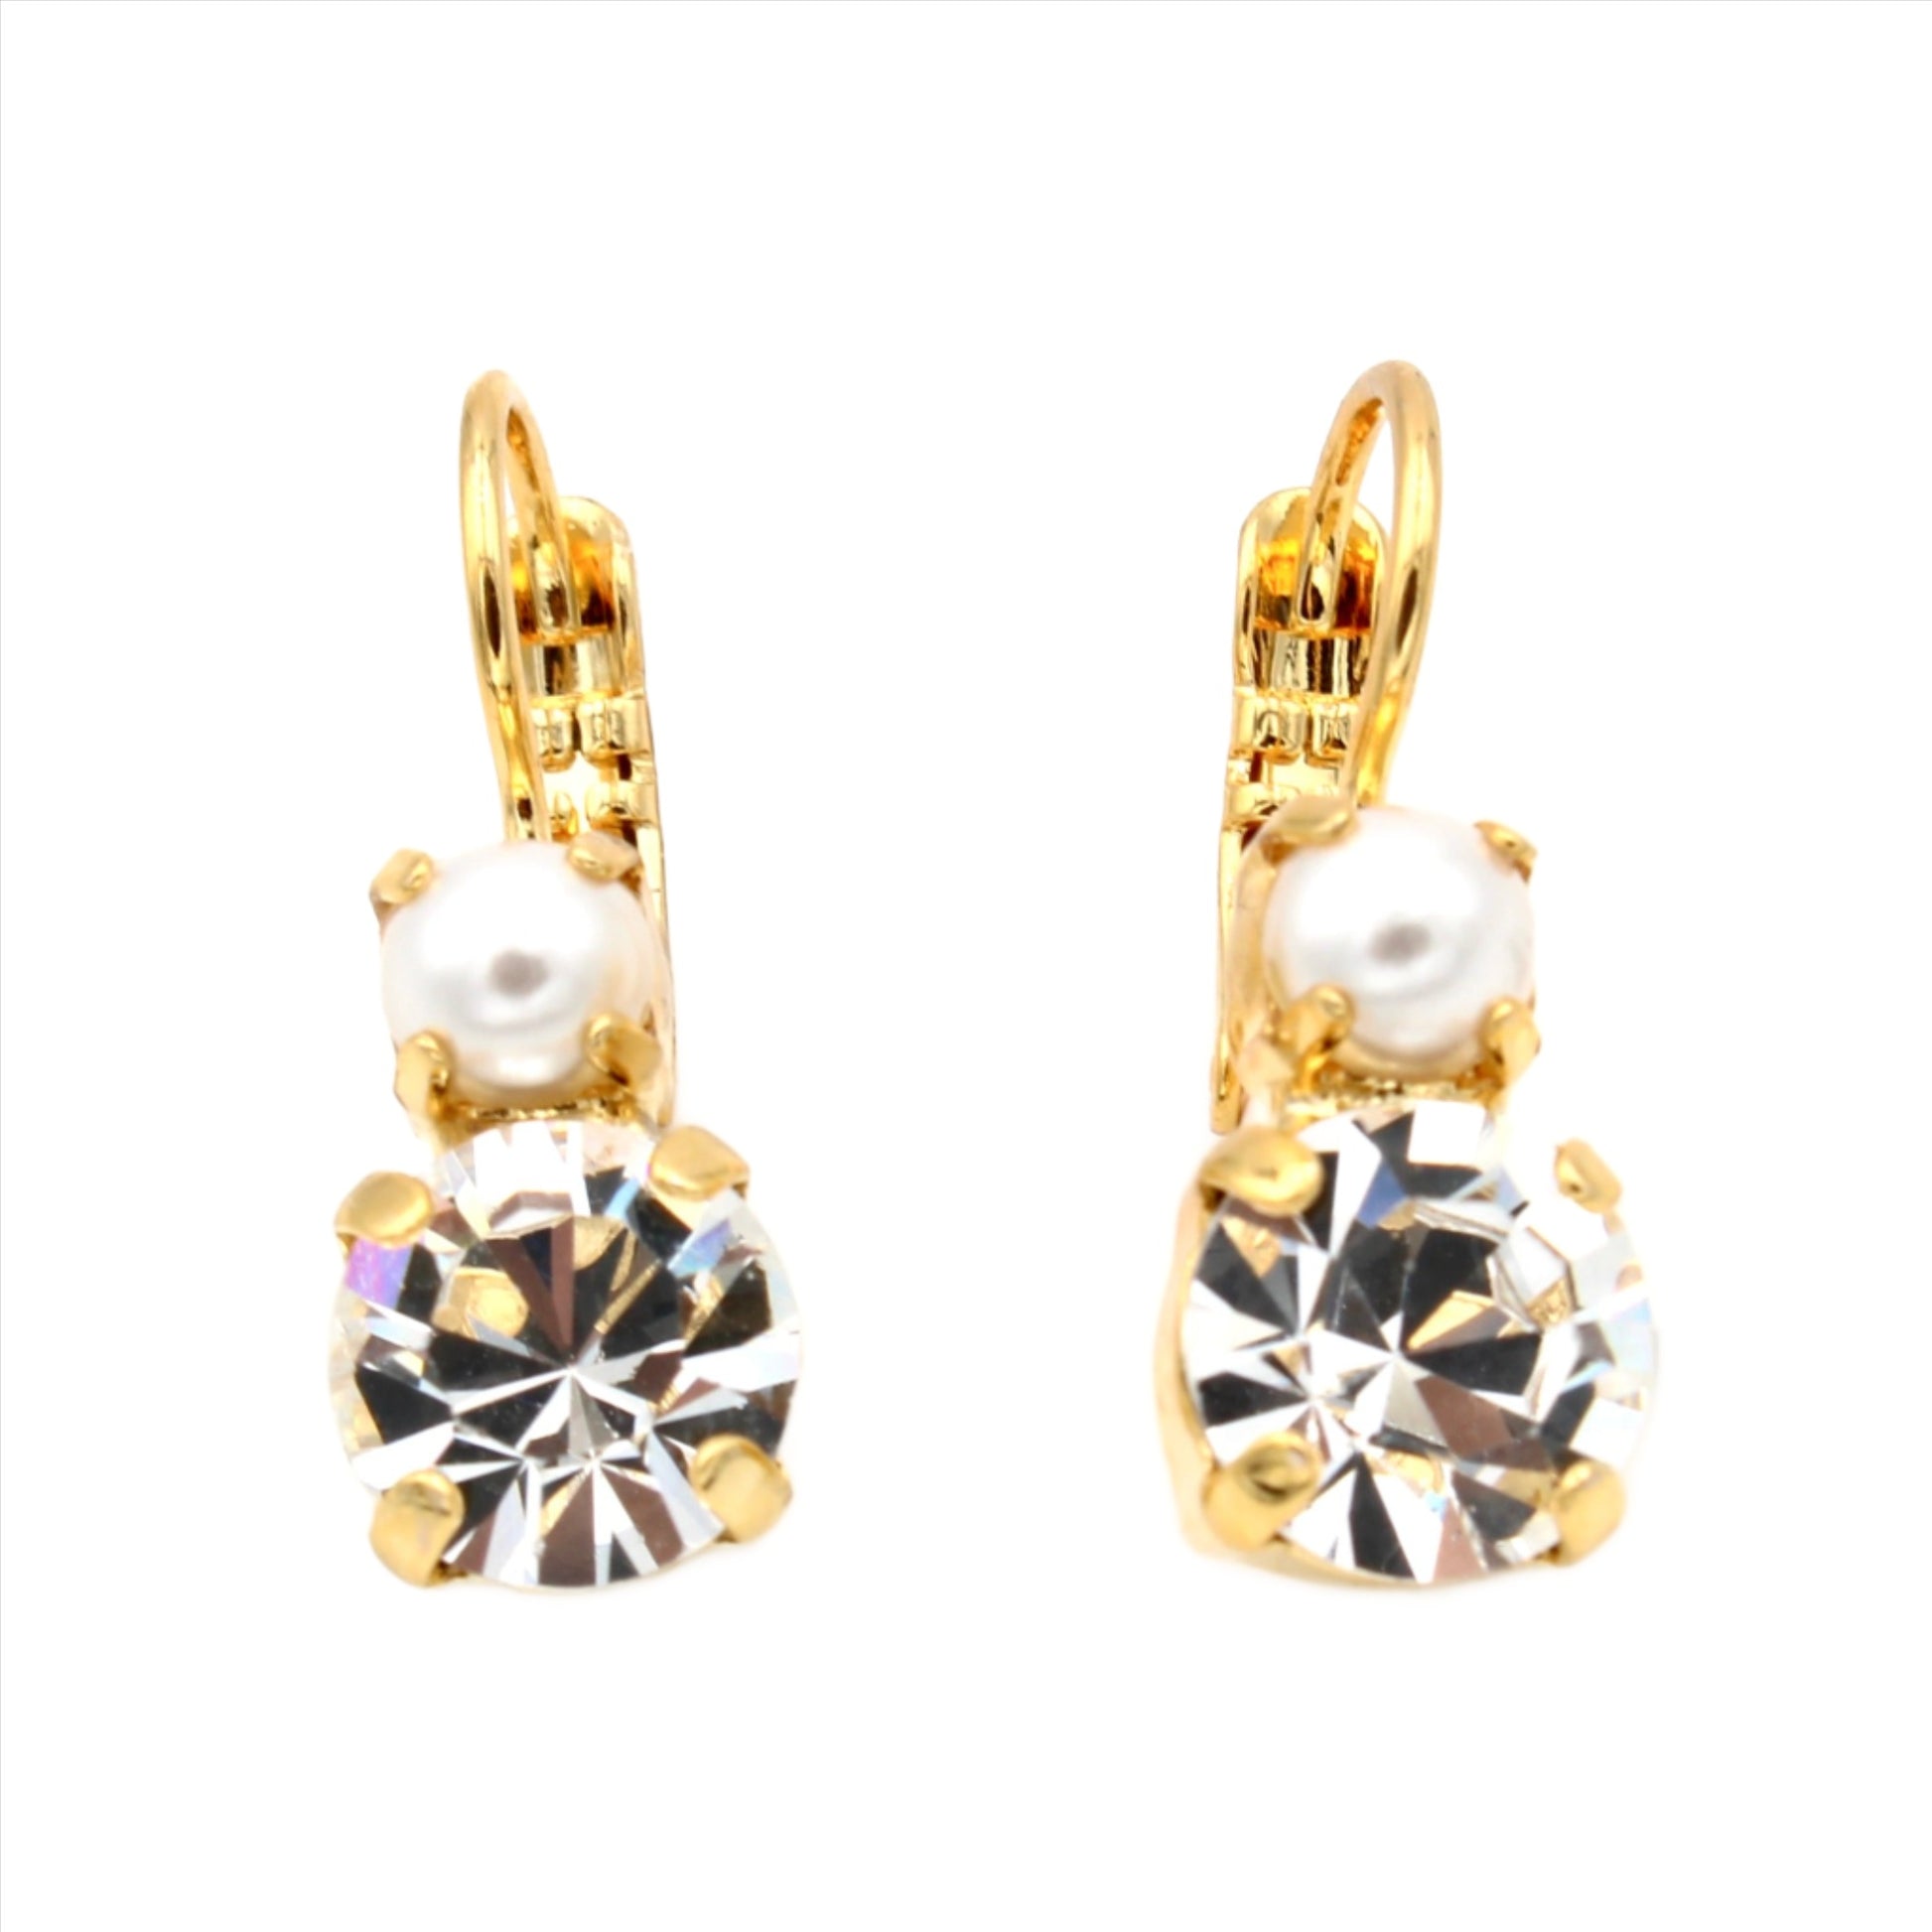 Crystal Pearls Must Have Double Stone Earrings in Yellow Gold - MaryTyke's